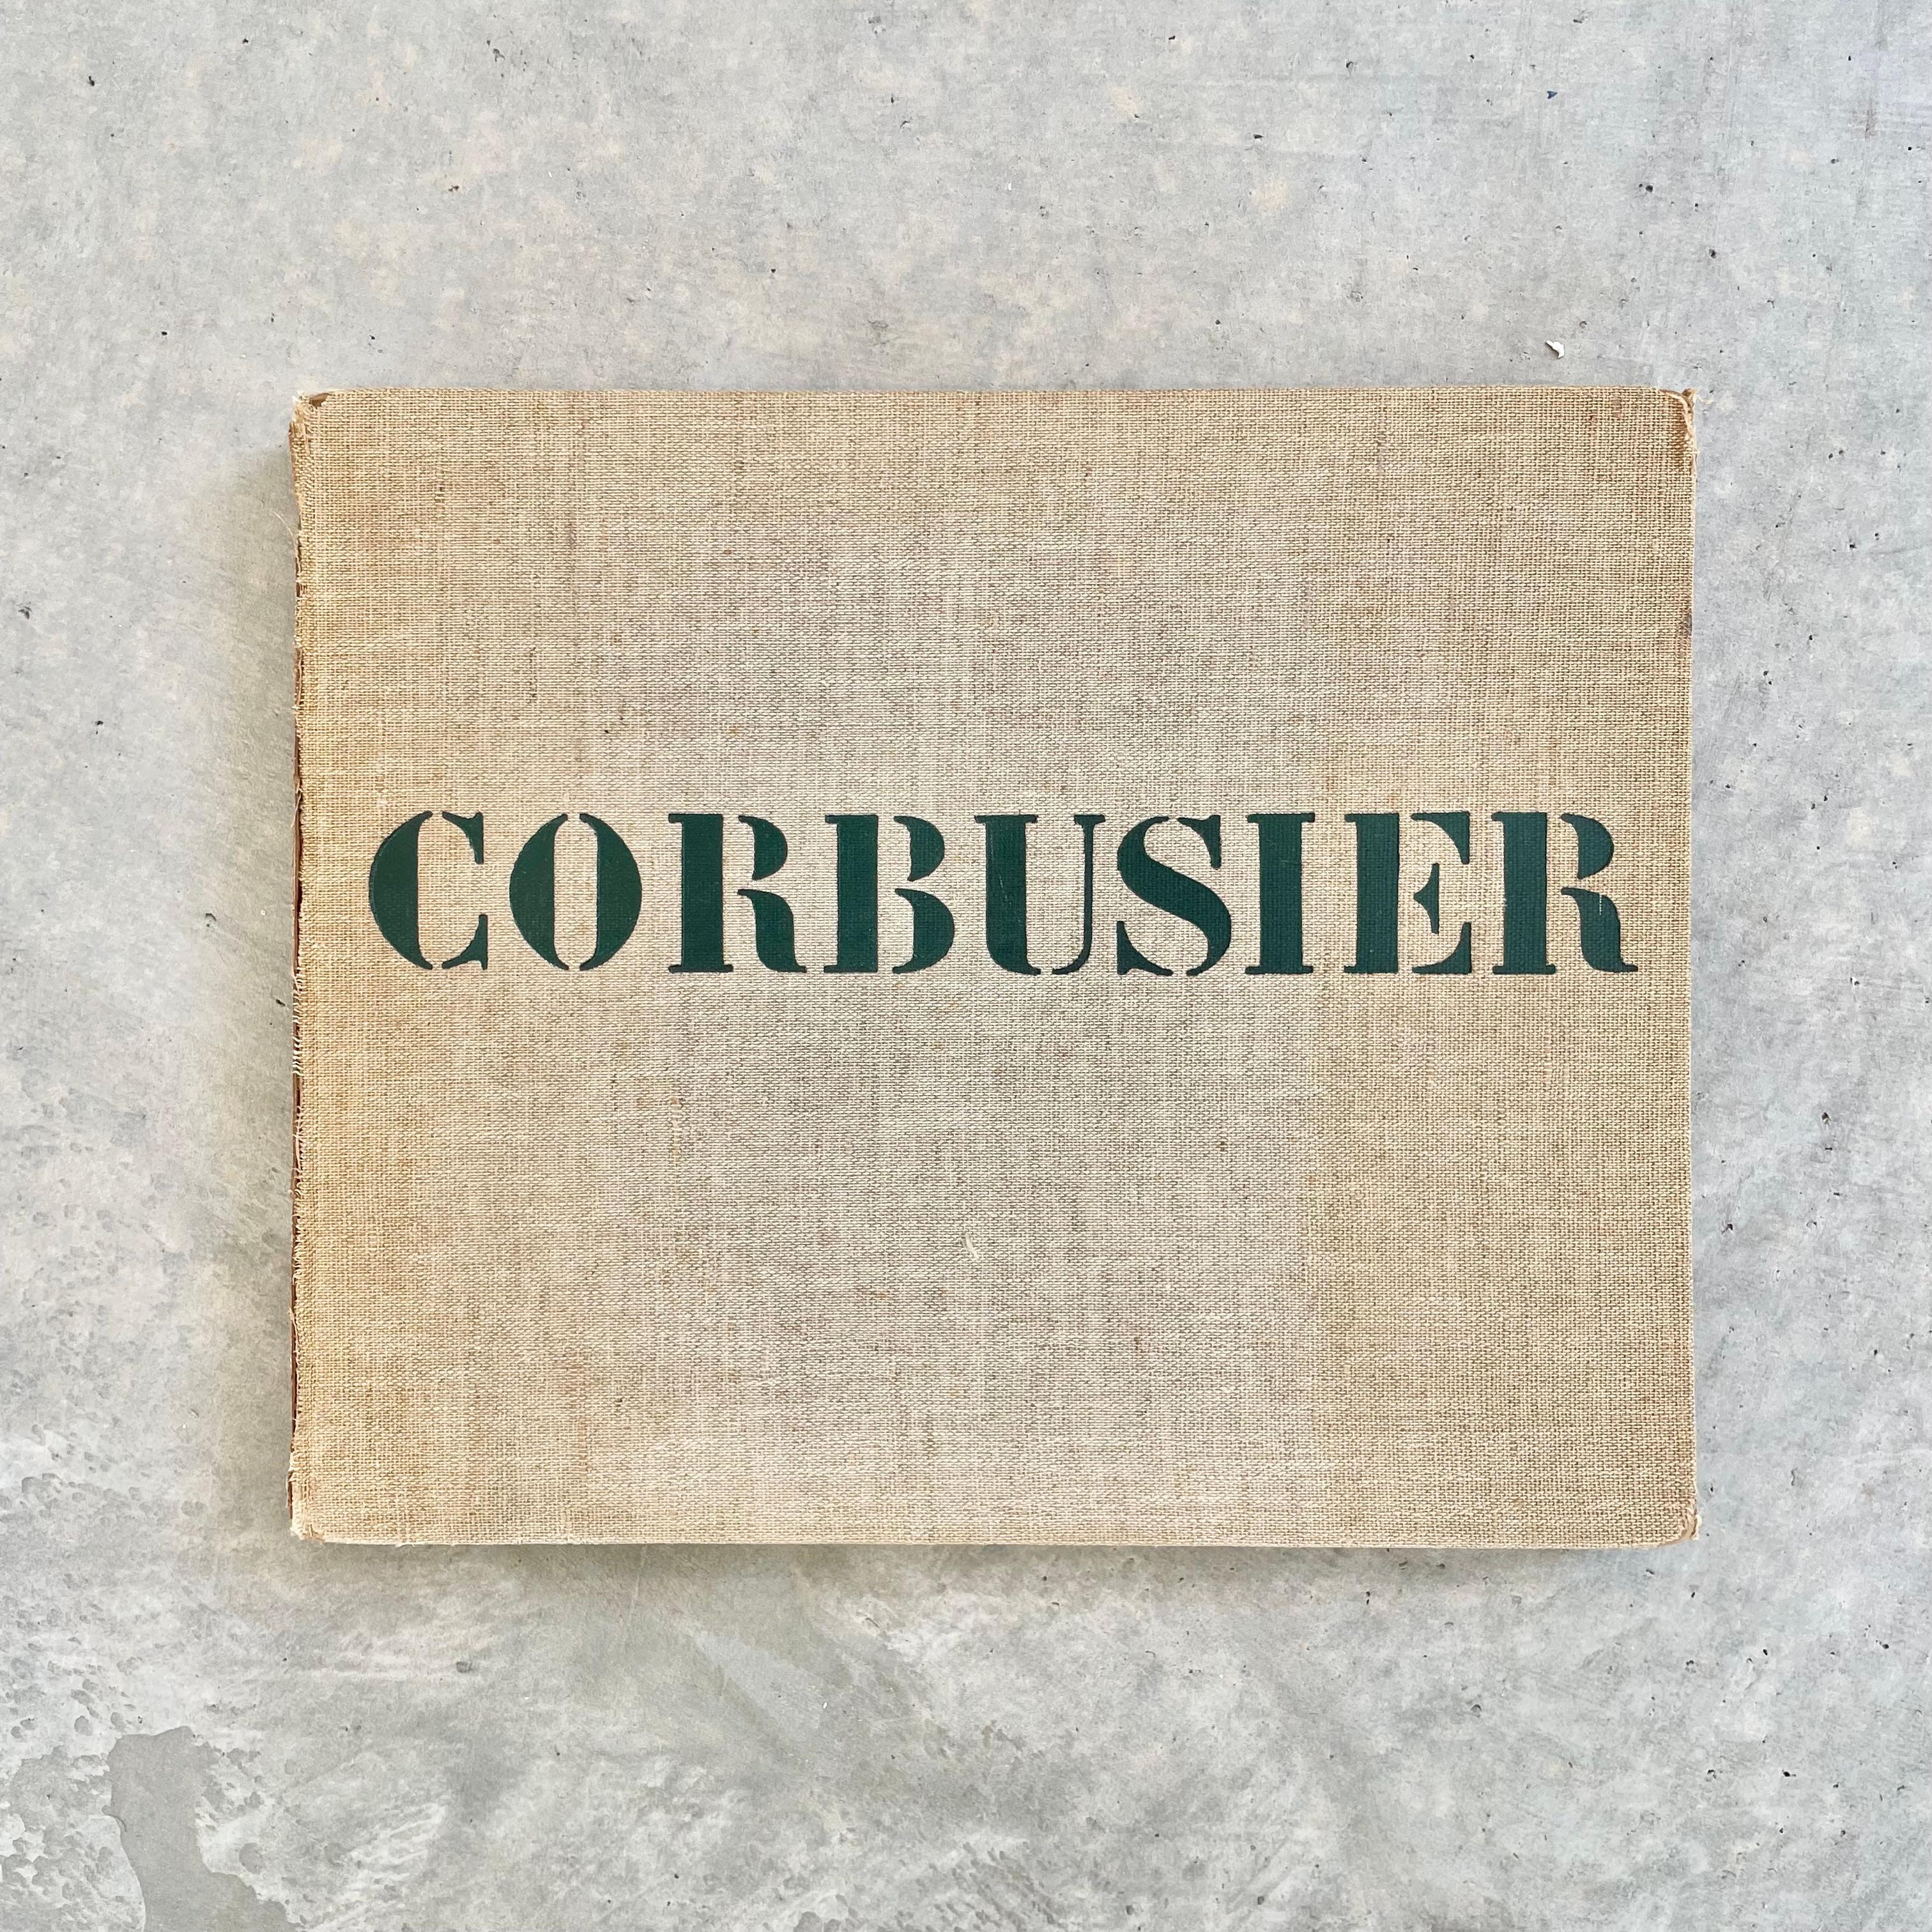 Swiss Corbusier, First Edition Book, 1935